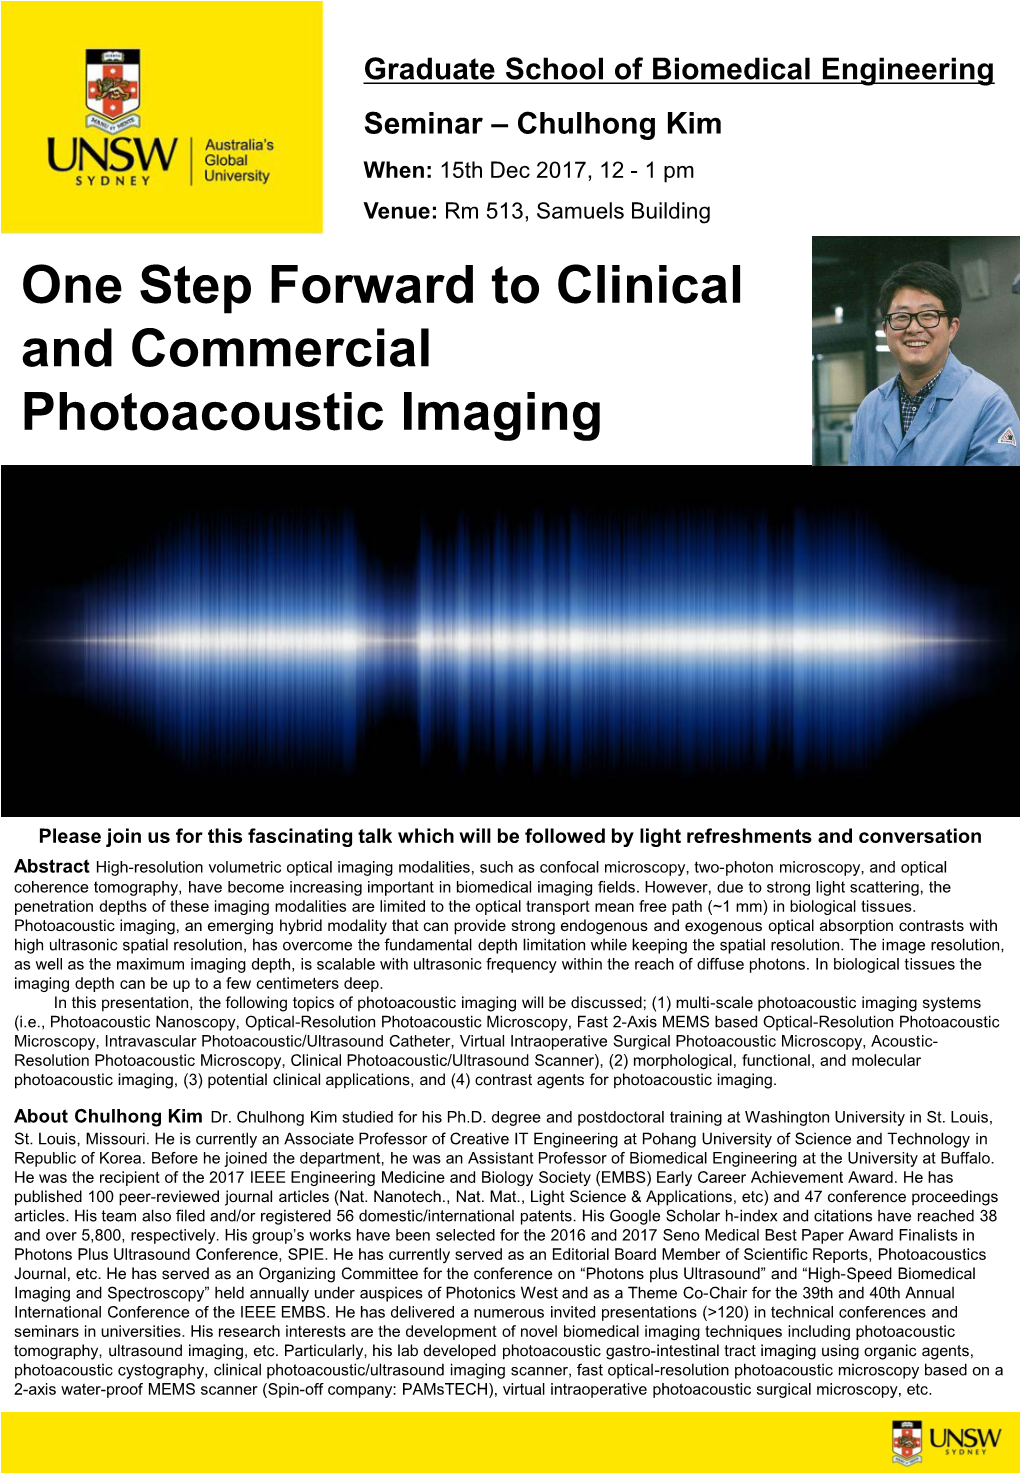 One Step Forward to Clinical and Commercial Photoacoustic Imaging